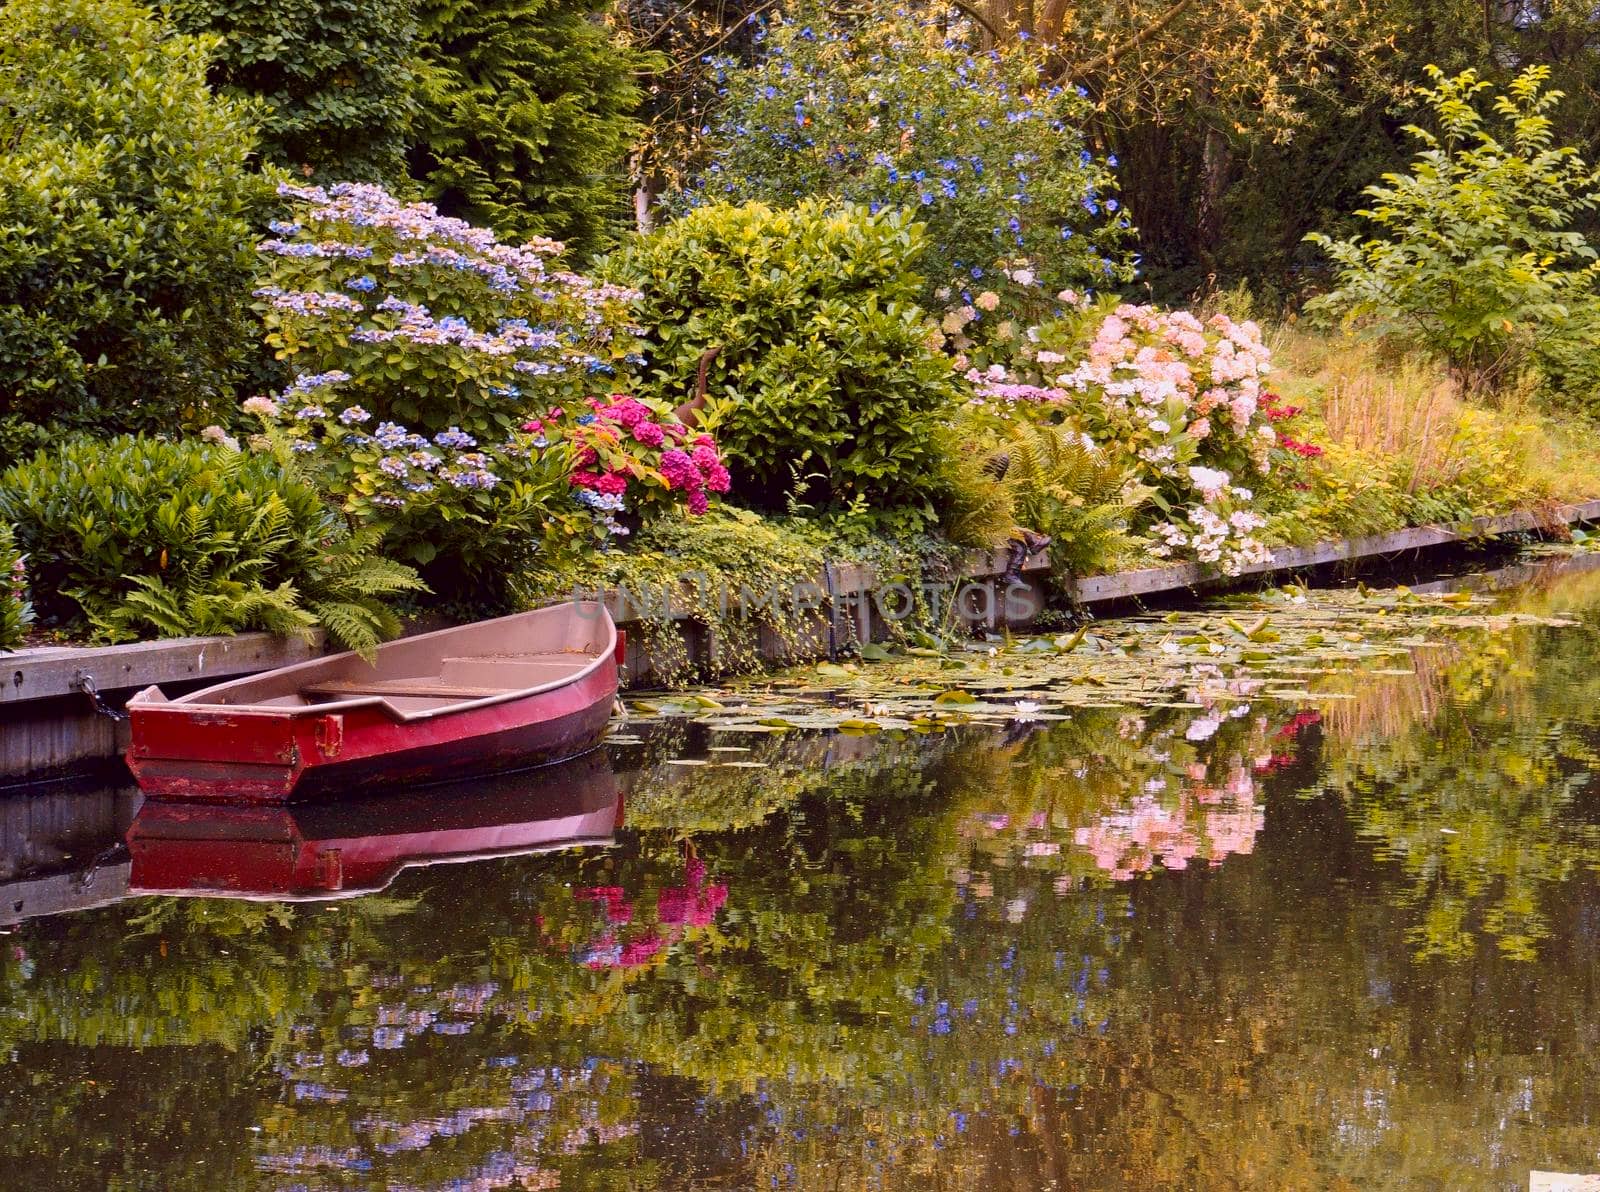 Romantic image of the river Eem in Holland, a rowing boat and a garden. Reflections in the water